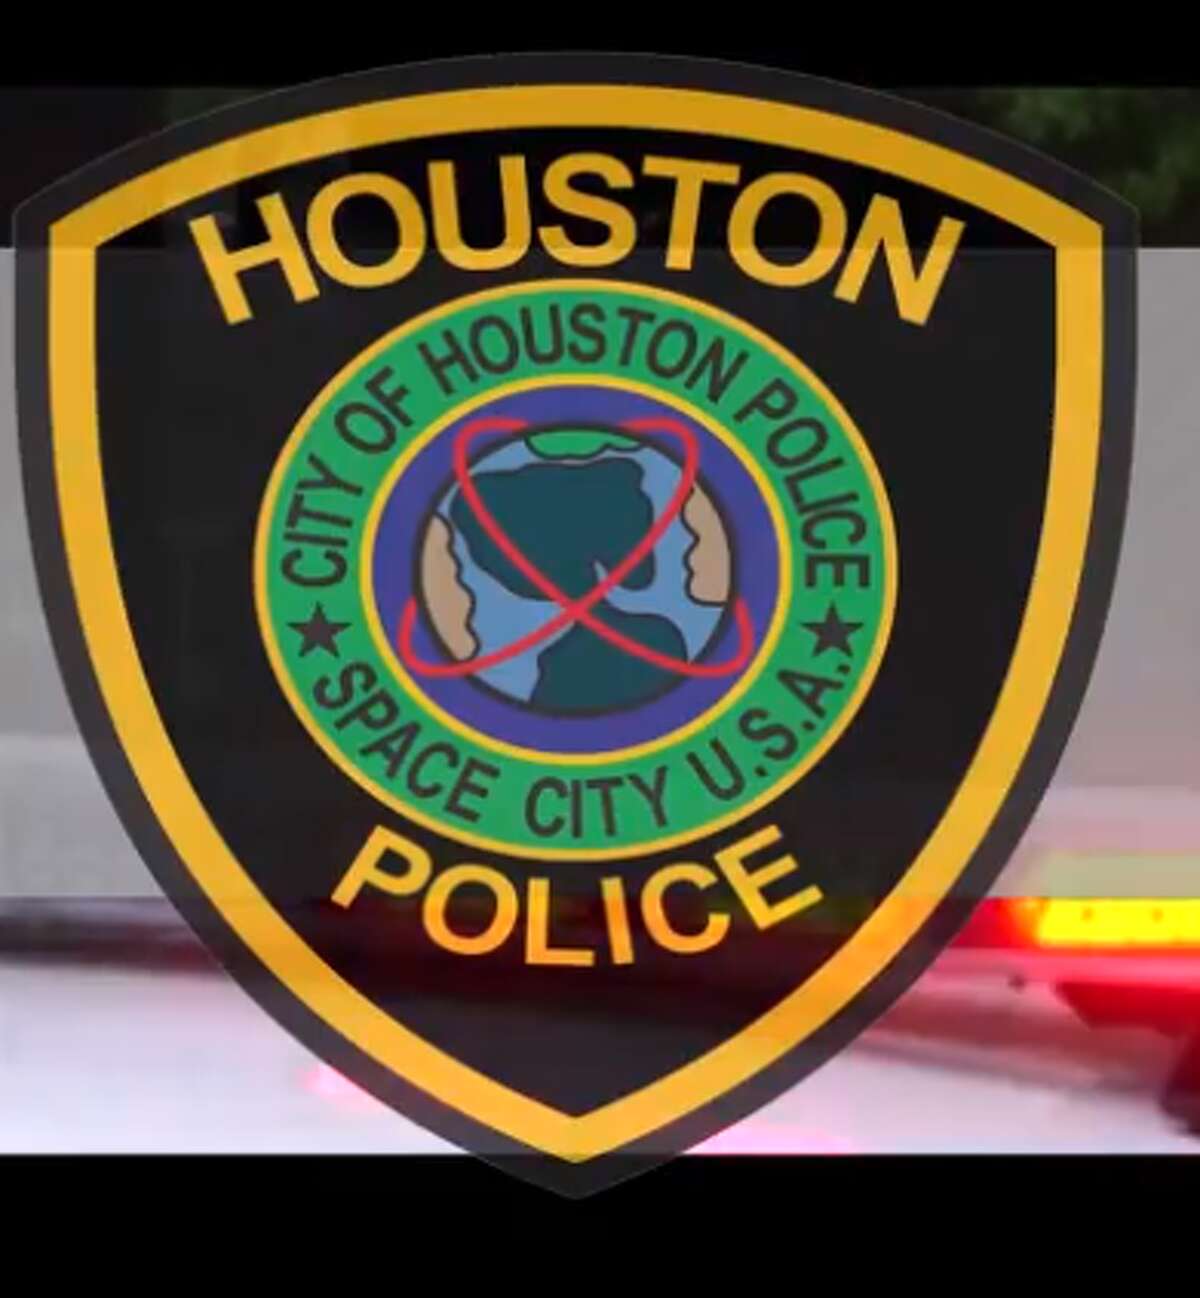 A Houston Police Department undercover officer has been charged with drunken driving after a four-car wreck.